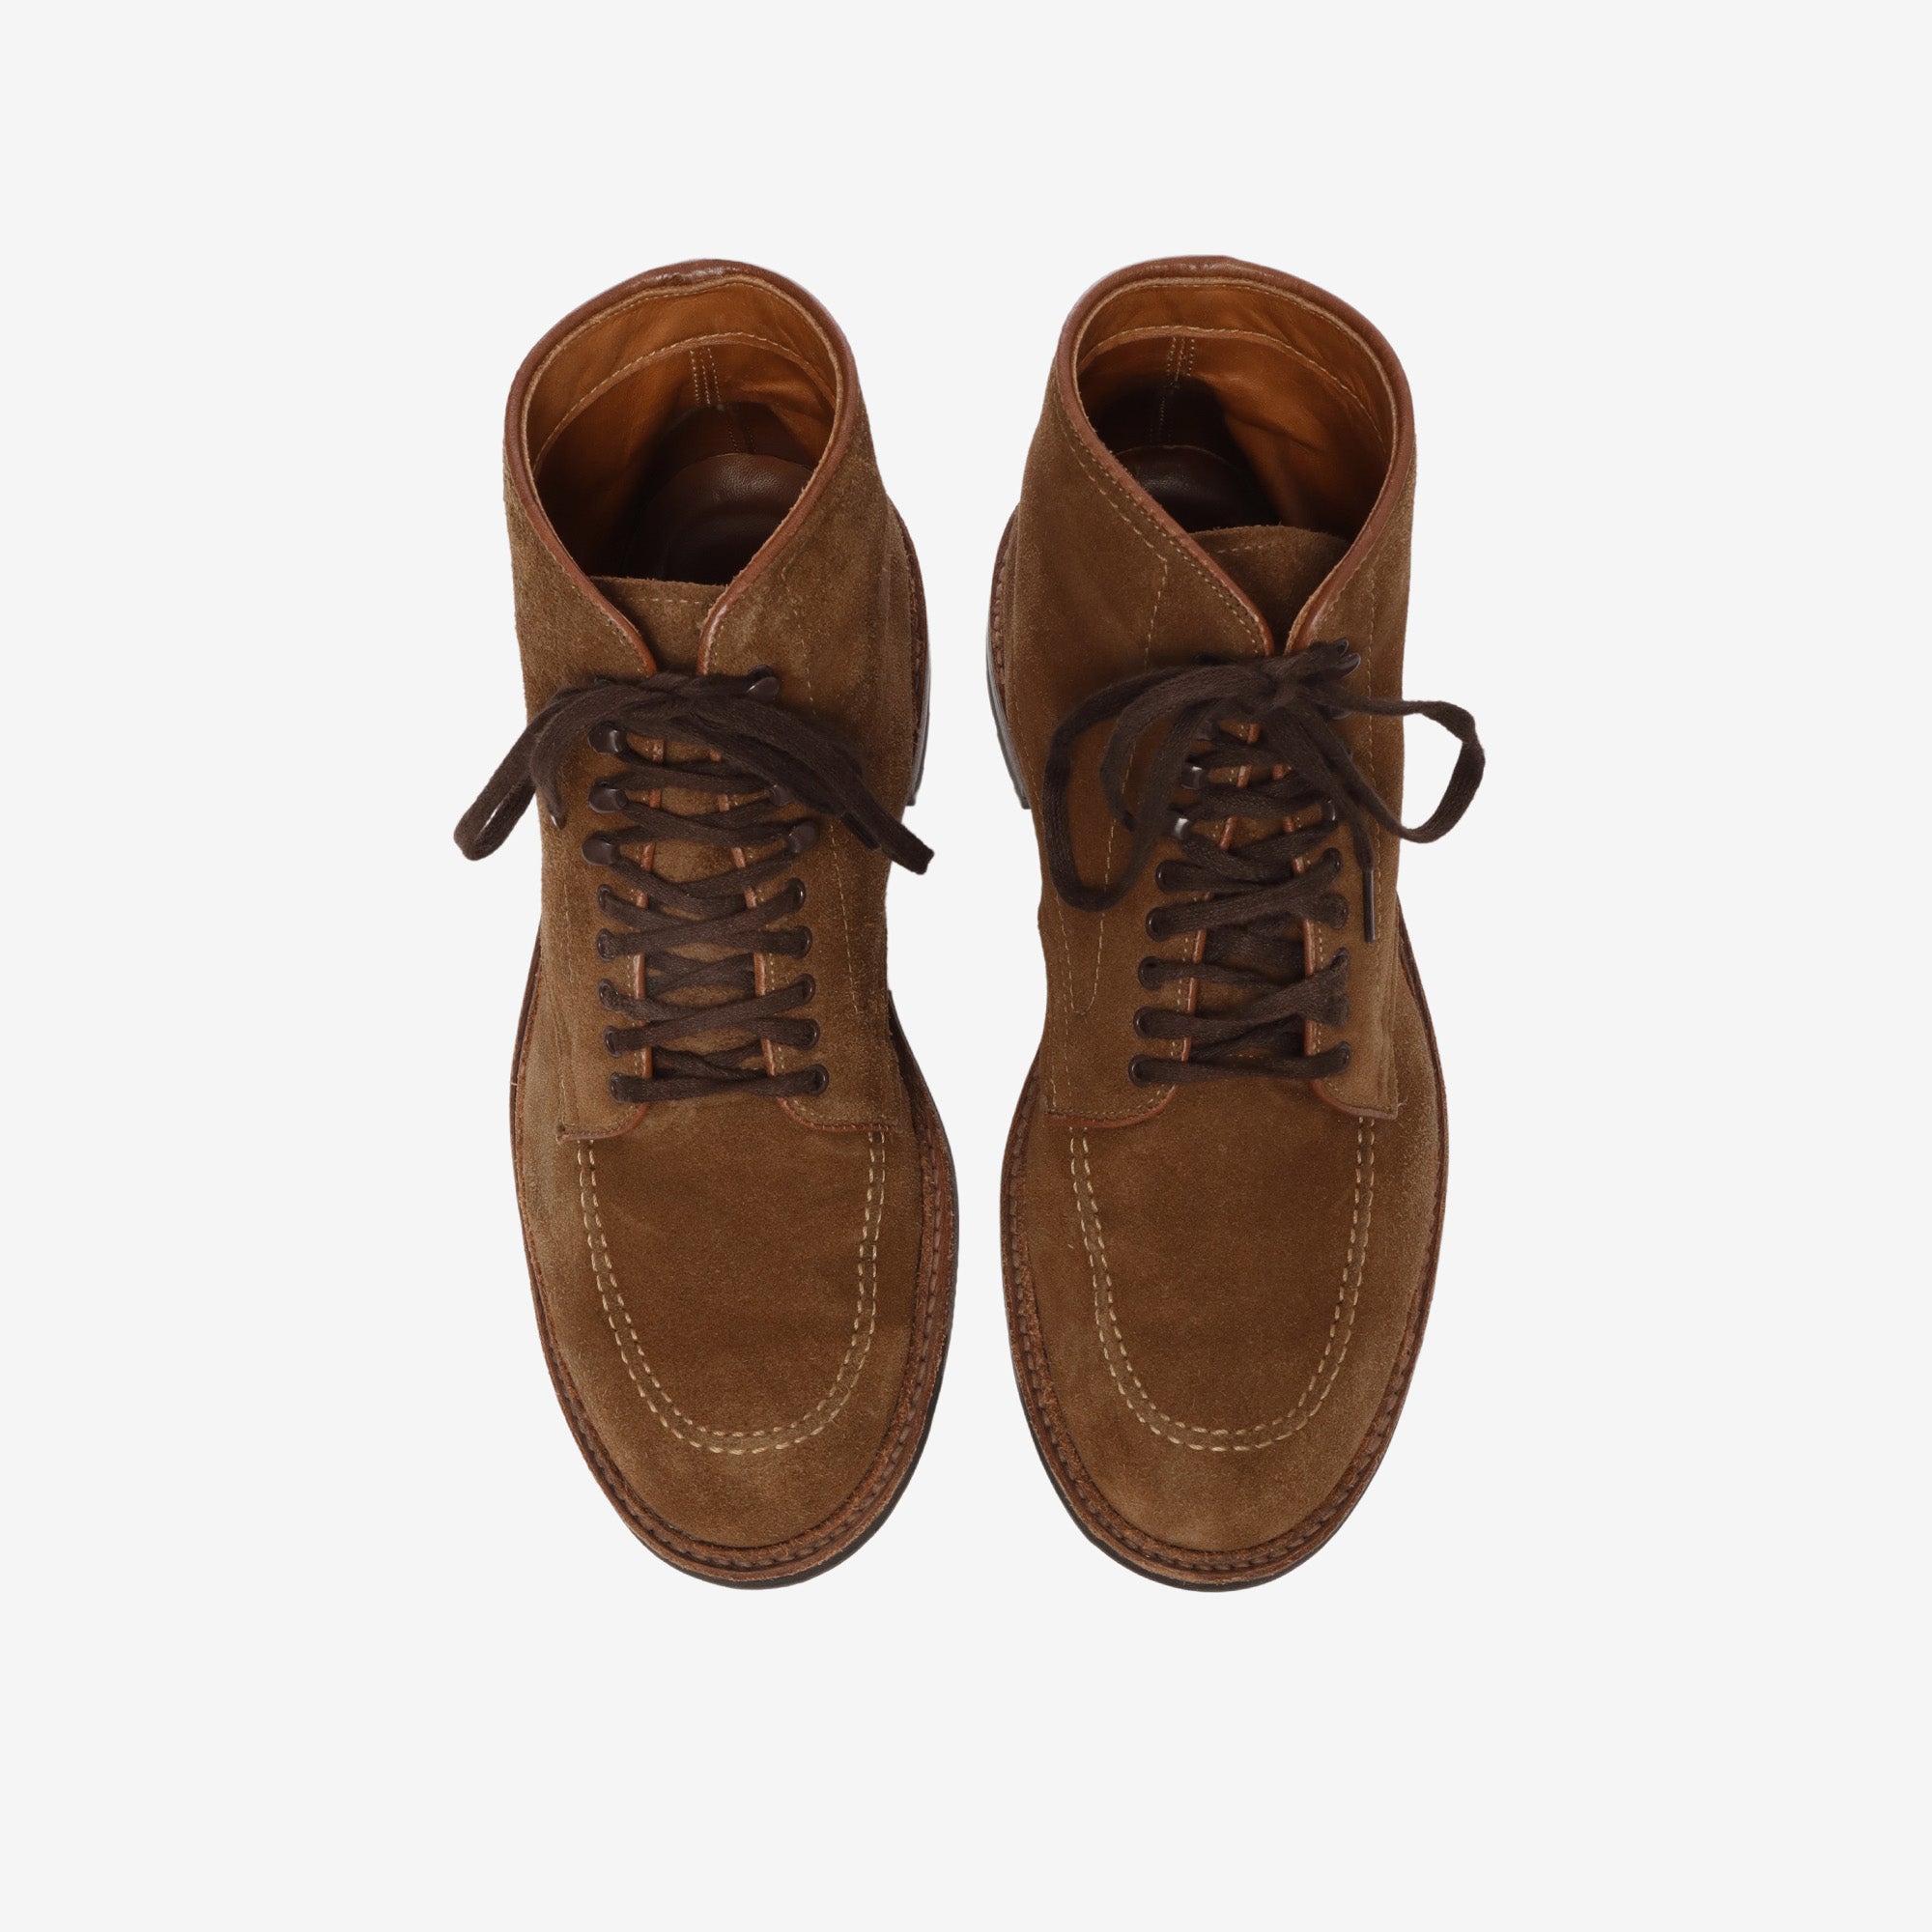 Suede Indy Boot 4011